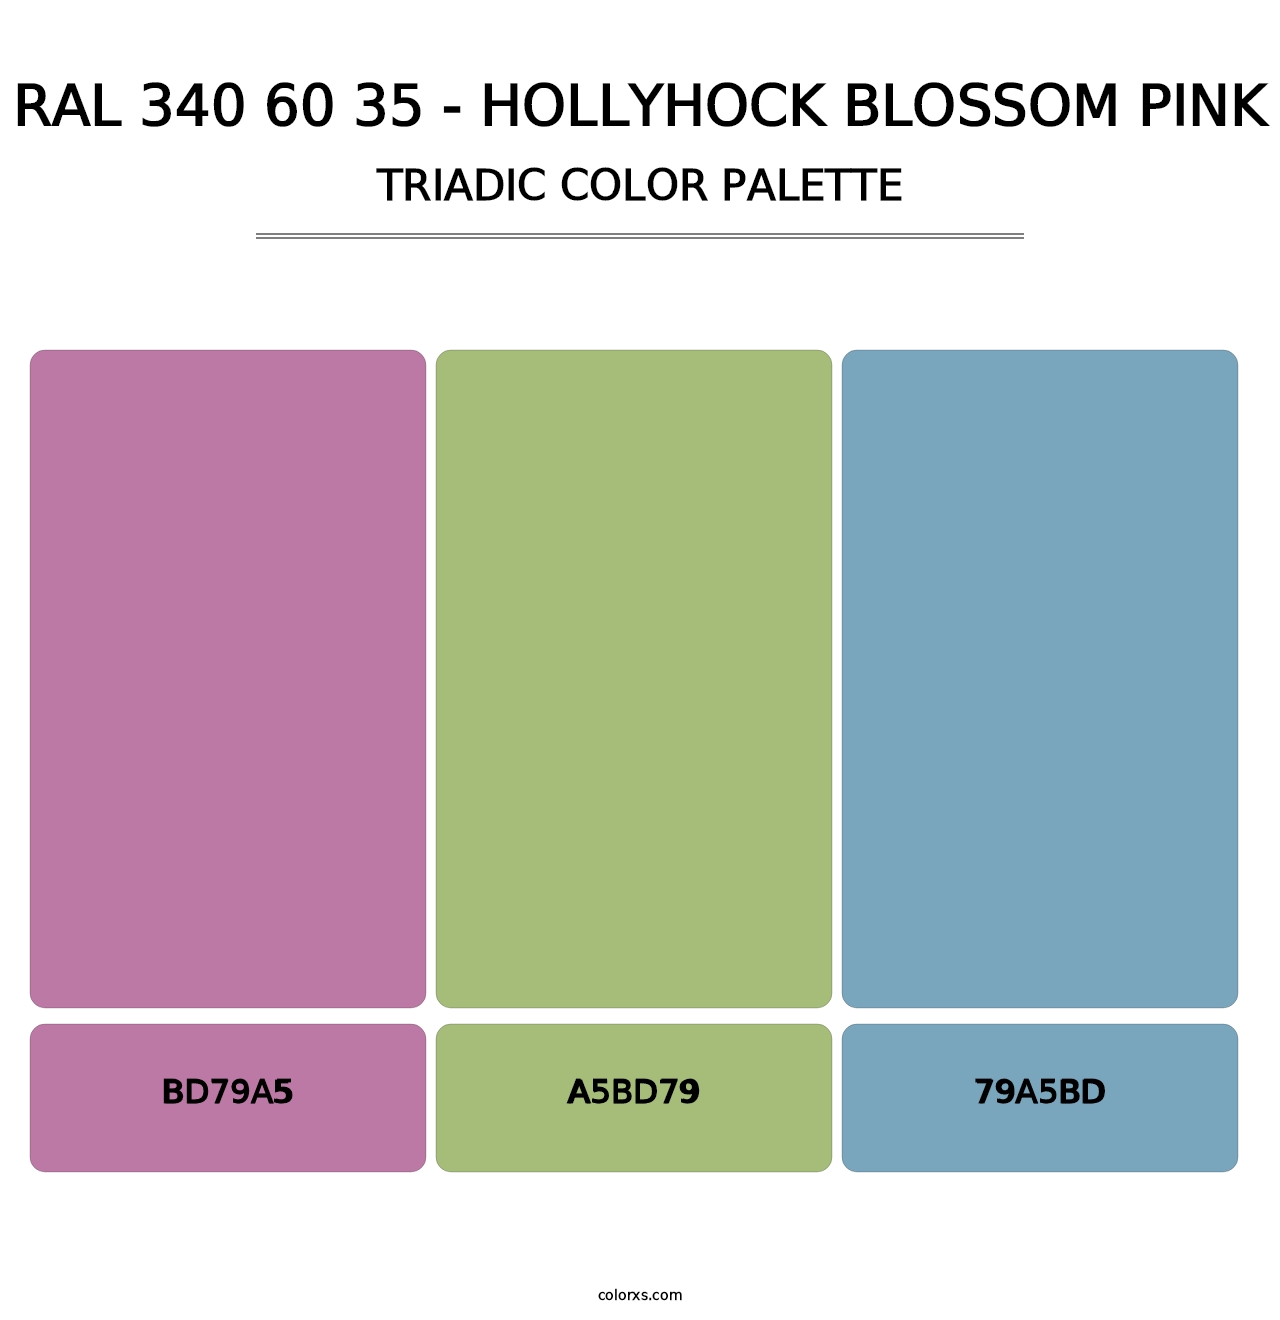 RAL 340 60 35 - Hollyhock Blossom Pink - Triadic Color Palette